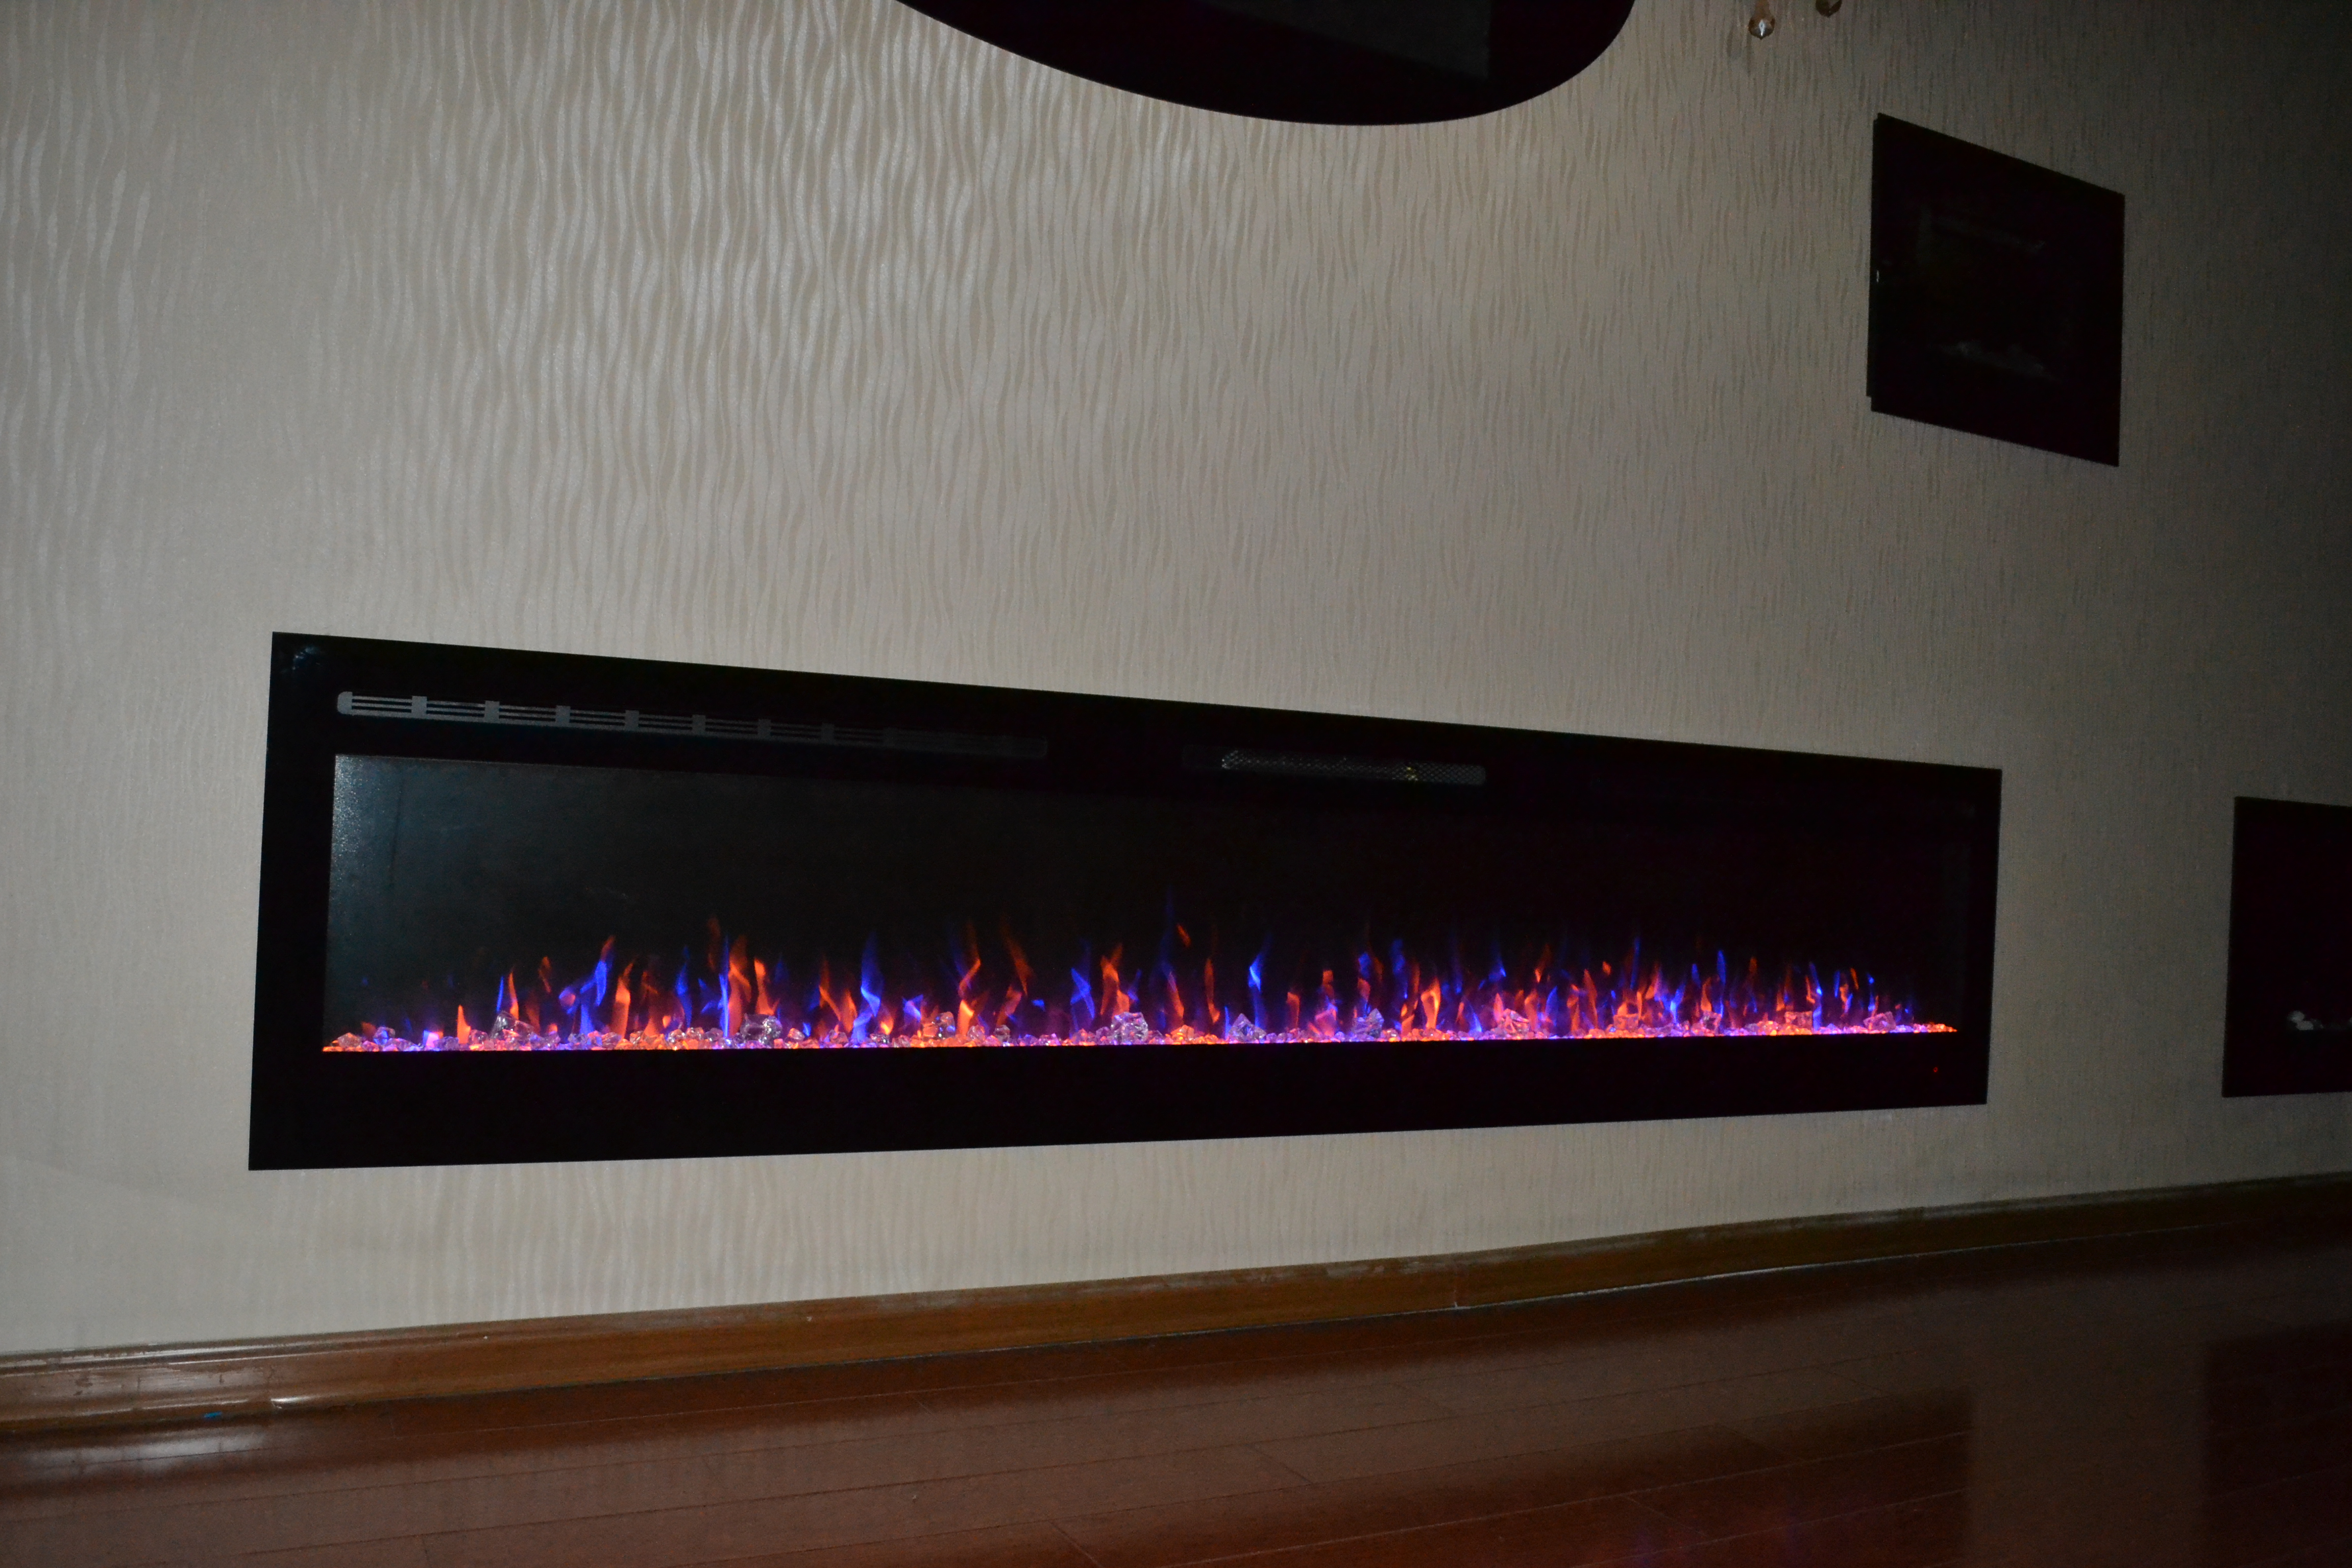 72inch large Black Wall Mounted Electric Fire with 3 colour Flames and can be inset crystals and purple flames